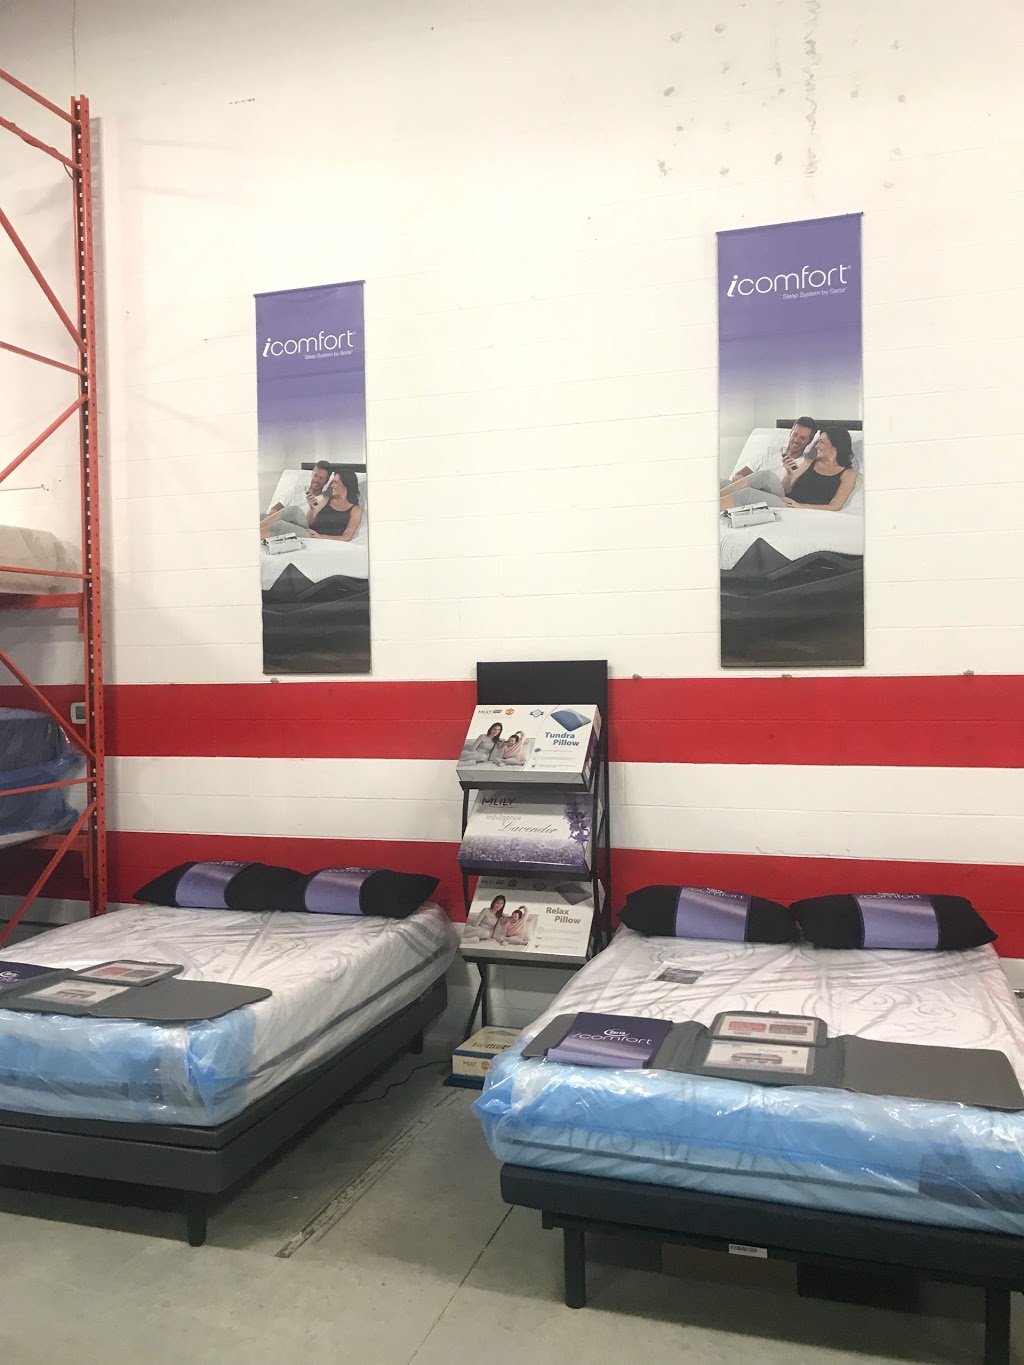 National Mattress Outlet Plus+ | 7701 Woodbine Ave Unit 5, Markham, ON L3R 2R4, Canada | Phone: (905) 963-0890